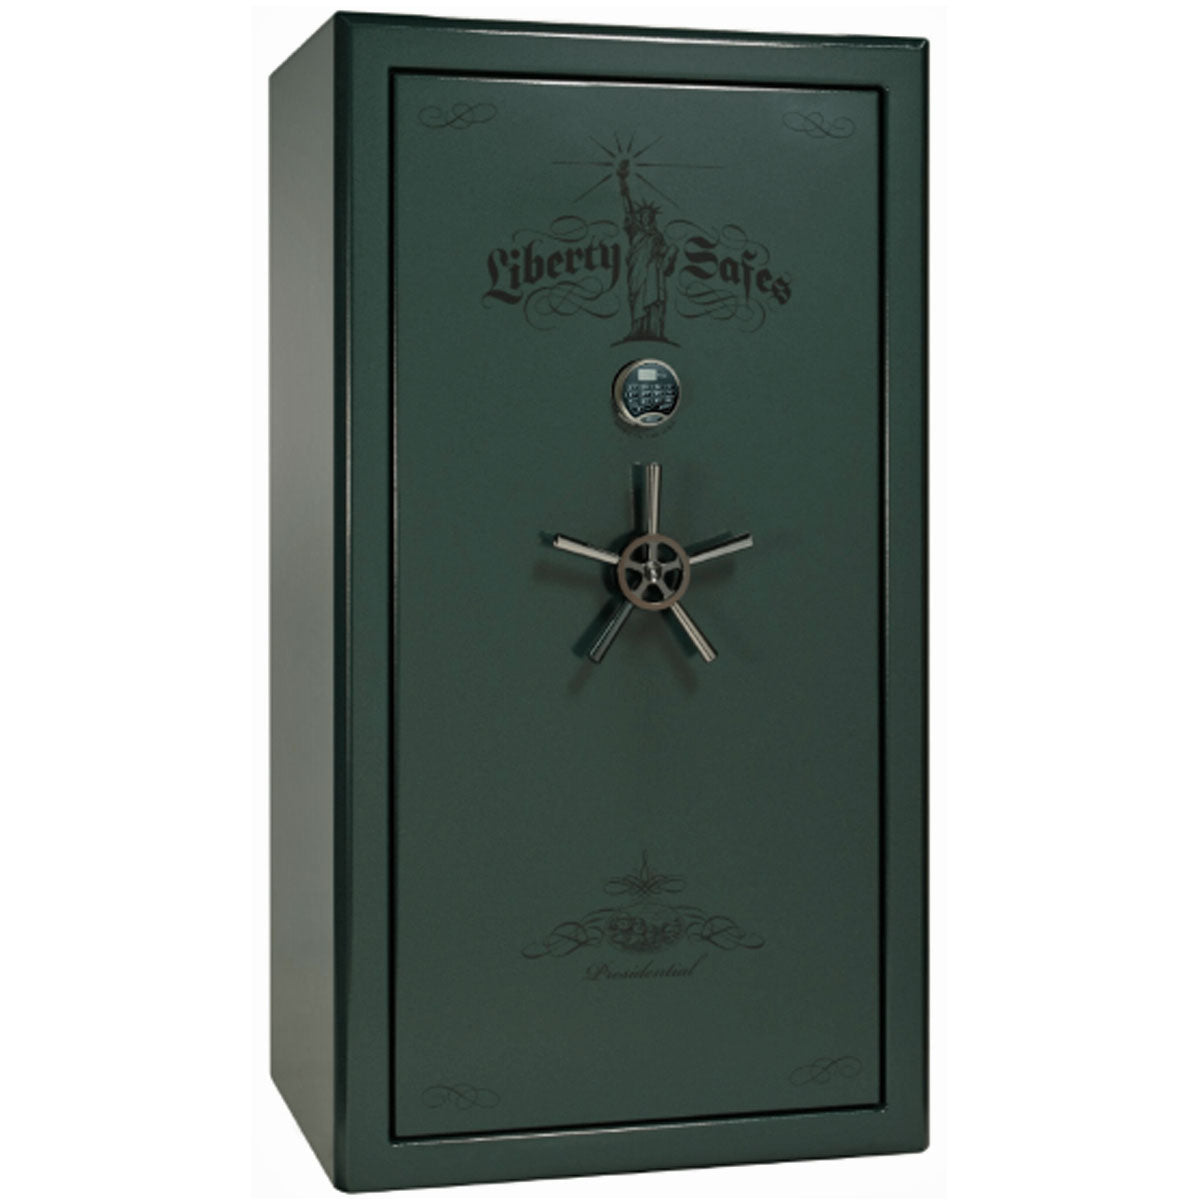 Liberty Safe Presidential 40 in Green Marble with Black Chrome Electronic Lock, closed door.